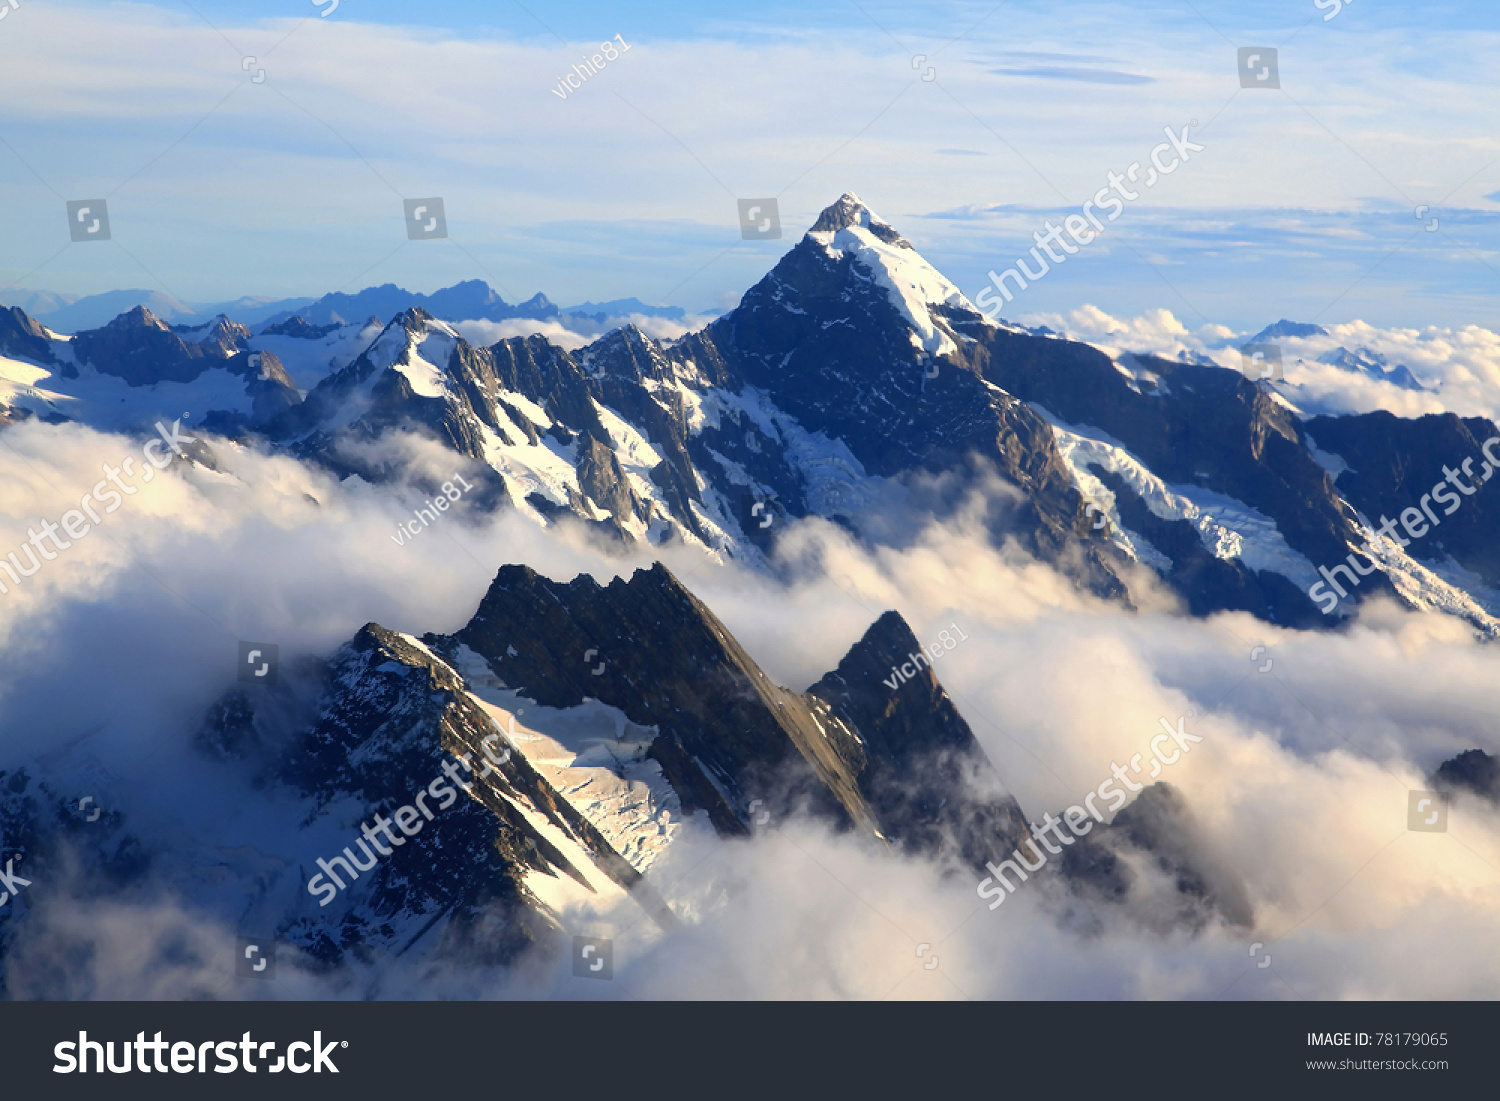 Alps Alpine Landscape of Mountain Cook Range Peak with mist from Helicopter, New Zealand #78179065